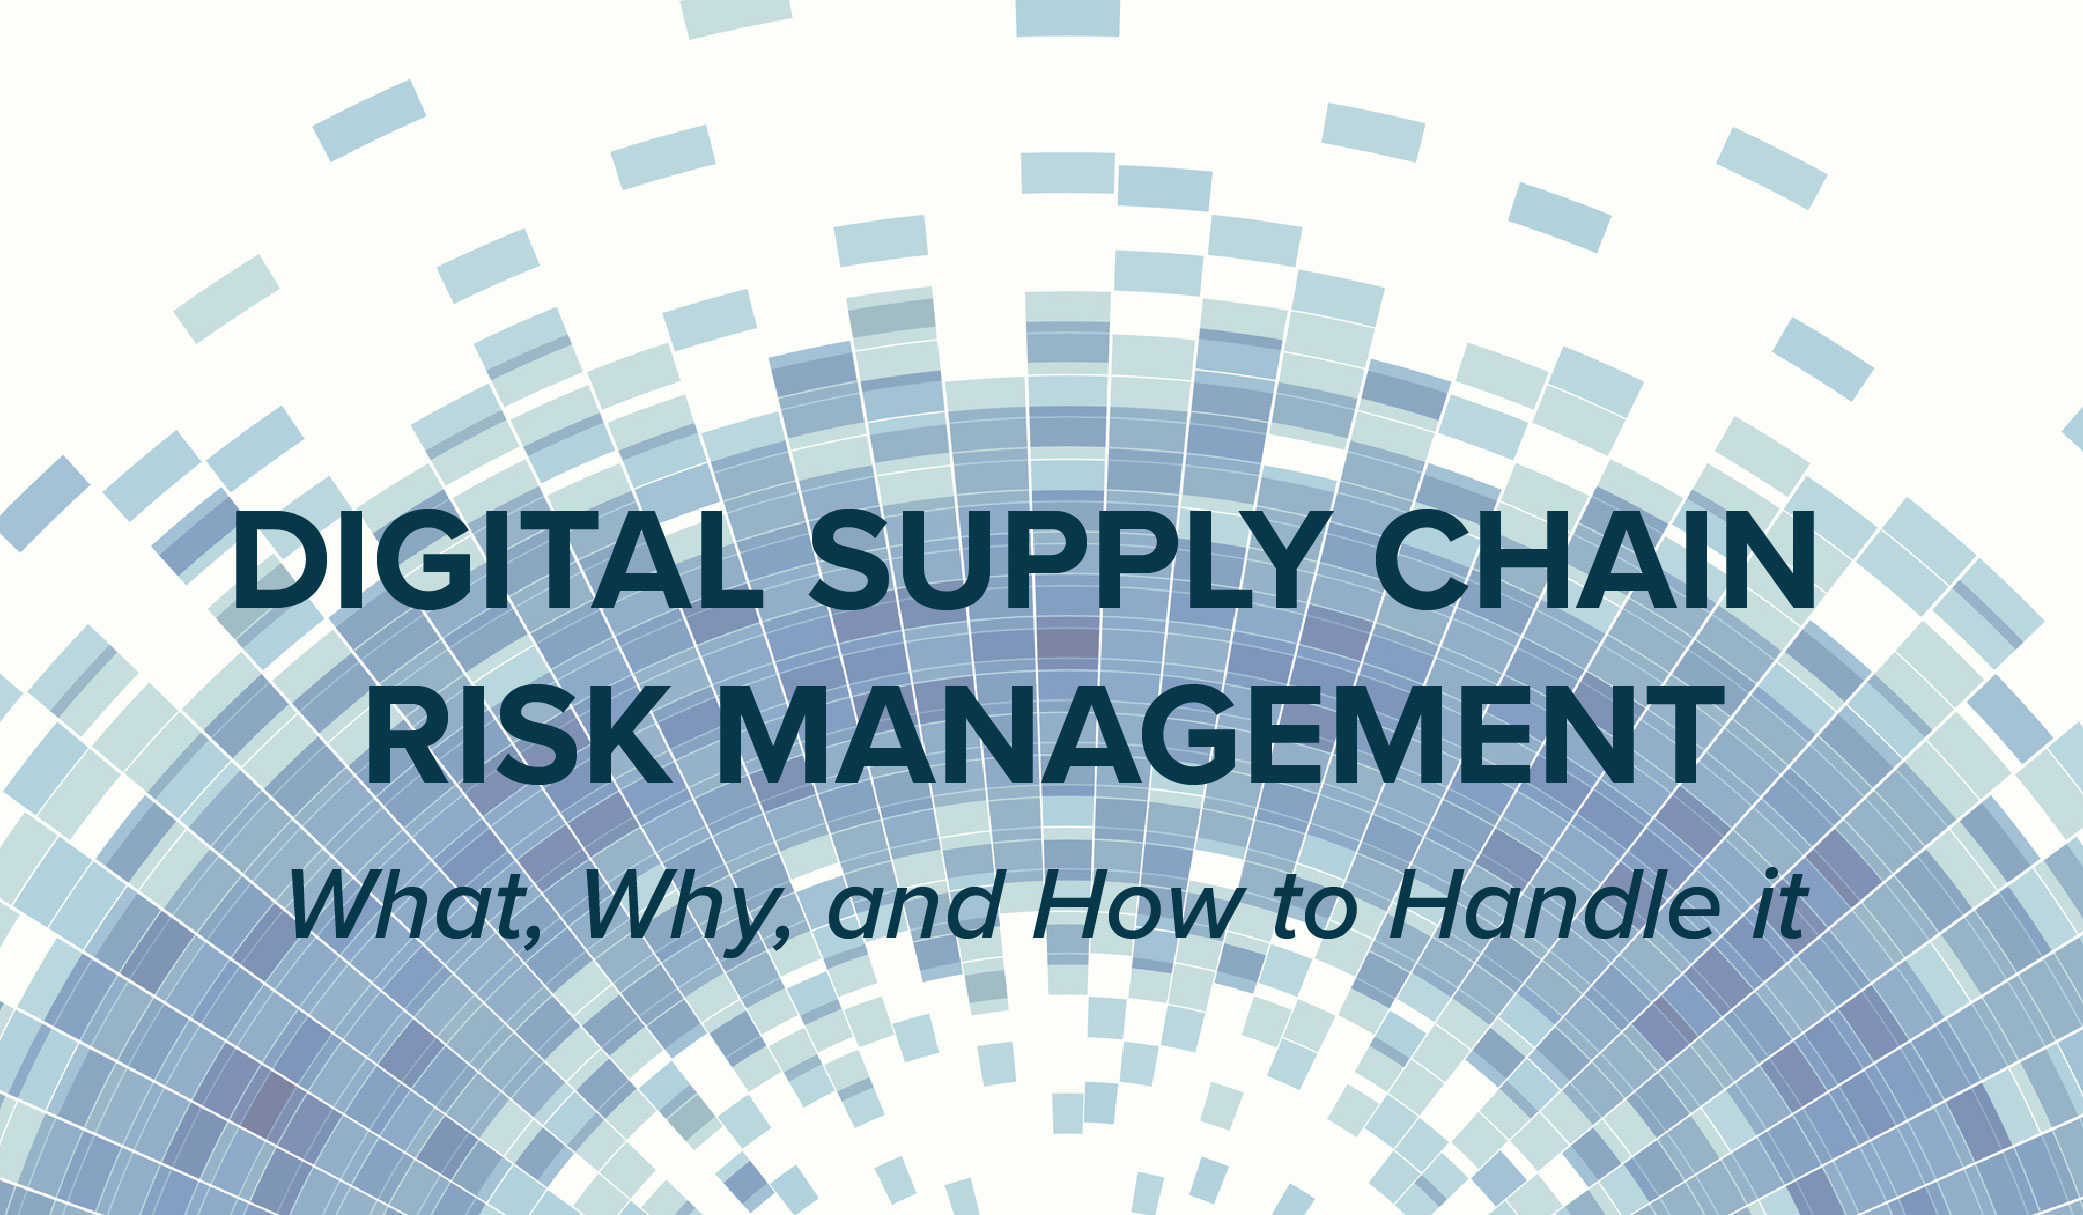 Digital Supply Chain Risk Management: What, Why and How to Handle it